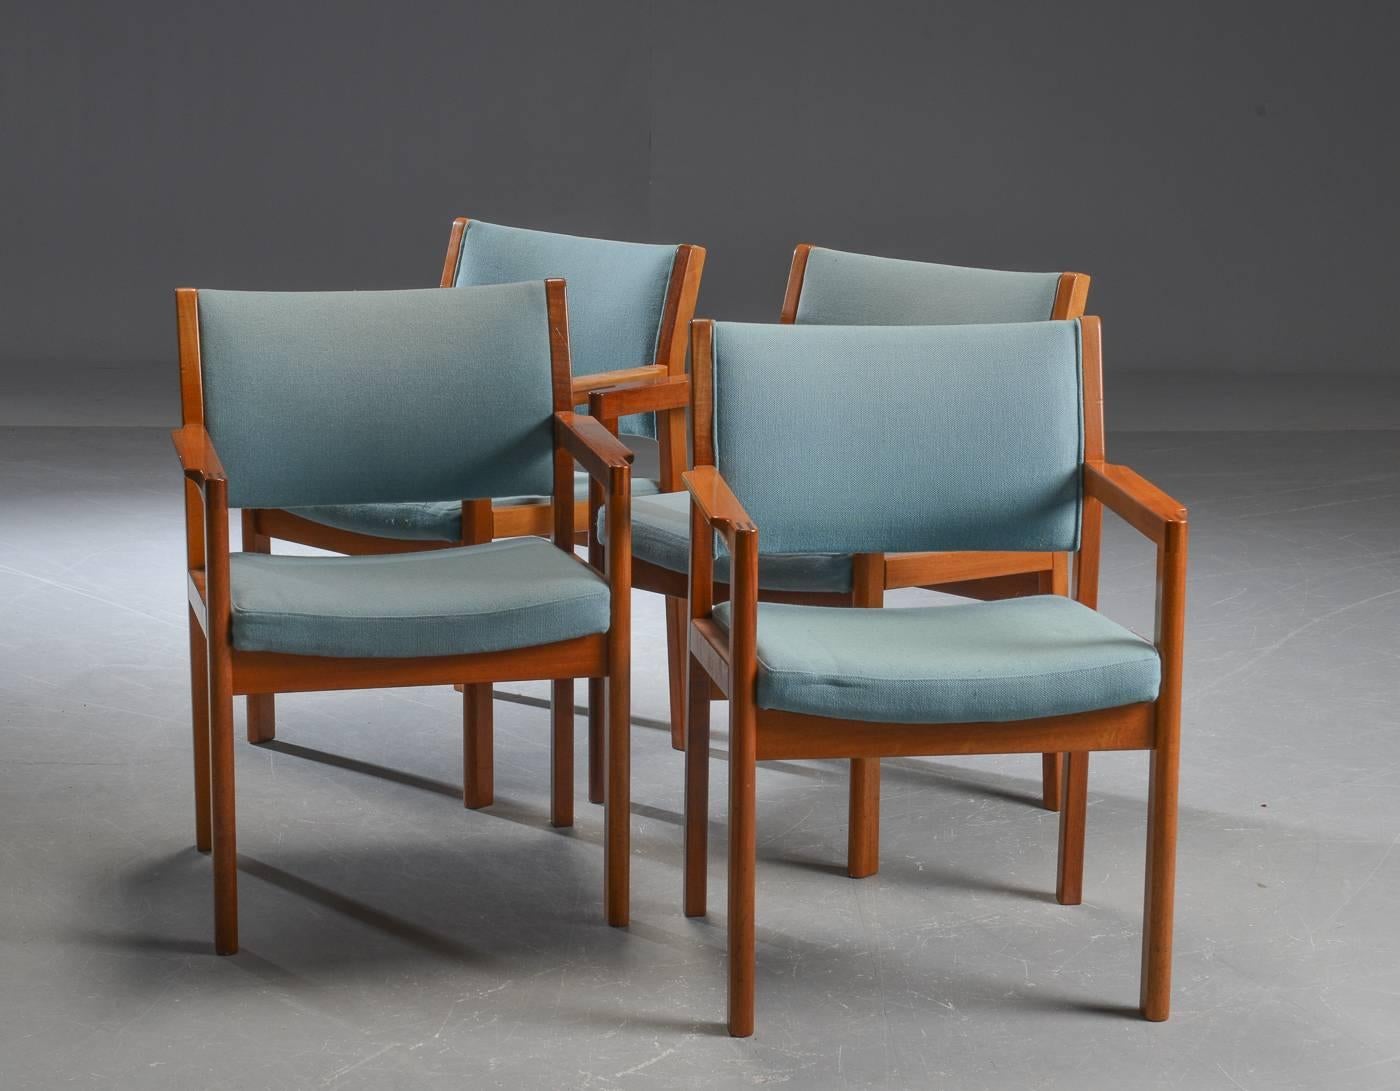 Set of four armchairs in mahogany and upholstery in blue fabric designed by Christian Hvidt for Søborg Møbelfabrik as part of the collection SM76 designed in 1976.

The chairs have been overlooked and refinished by our cabinetmaker to insure that